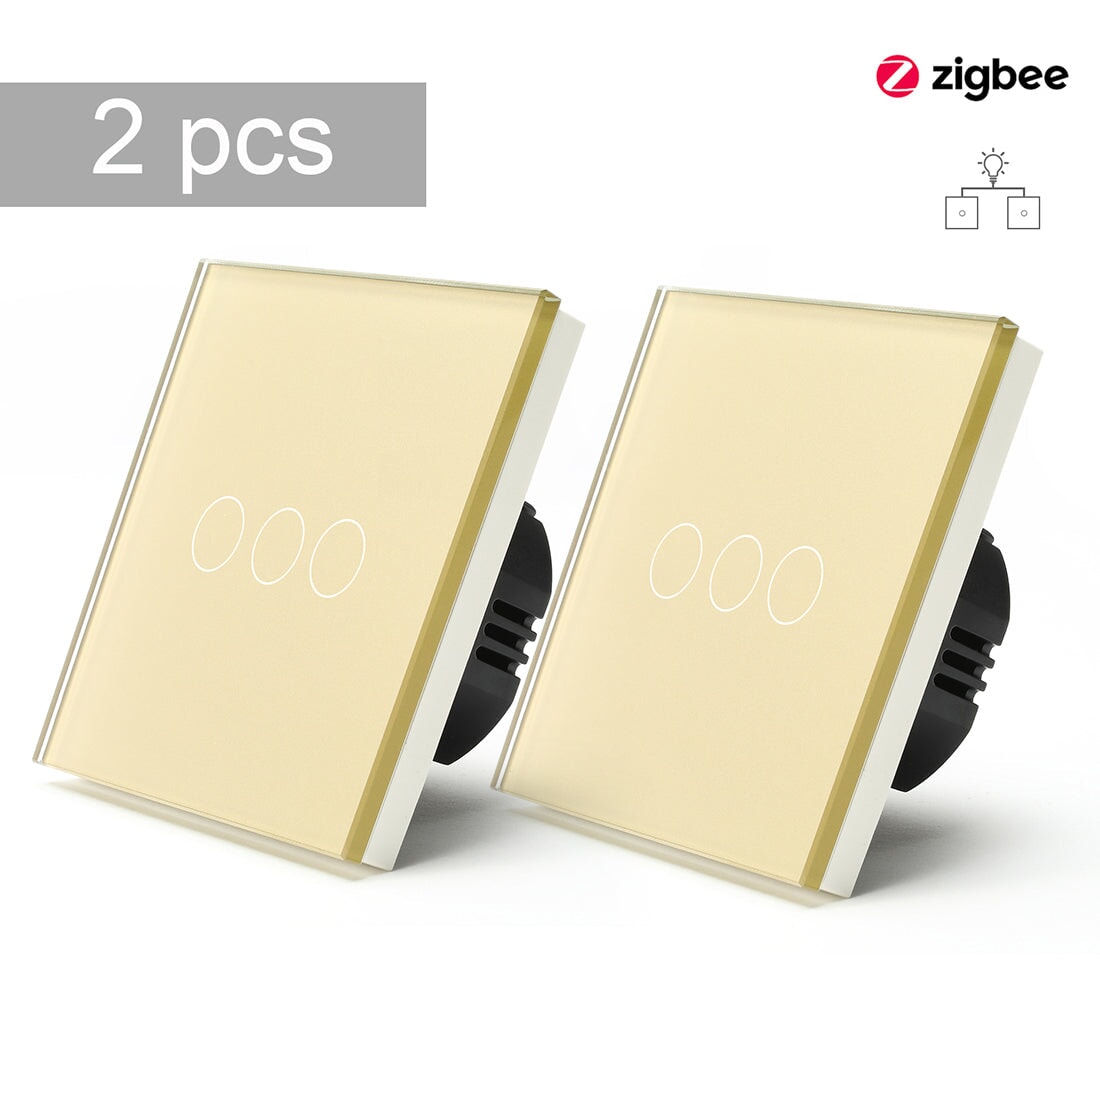 BSEED Zigbee Single Live Line Switch 1/2/3 Gang 1/2/3 Way Wall Smart Light Switch Single Live Line 1/2/3 pack Light Switches Bseedswitch Golden 3Gang 2 Pcs/Pack